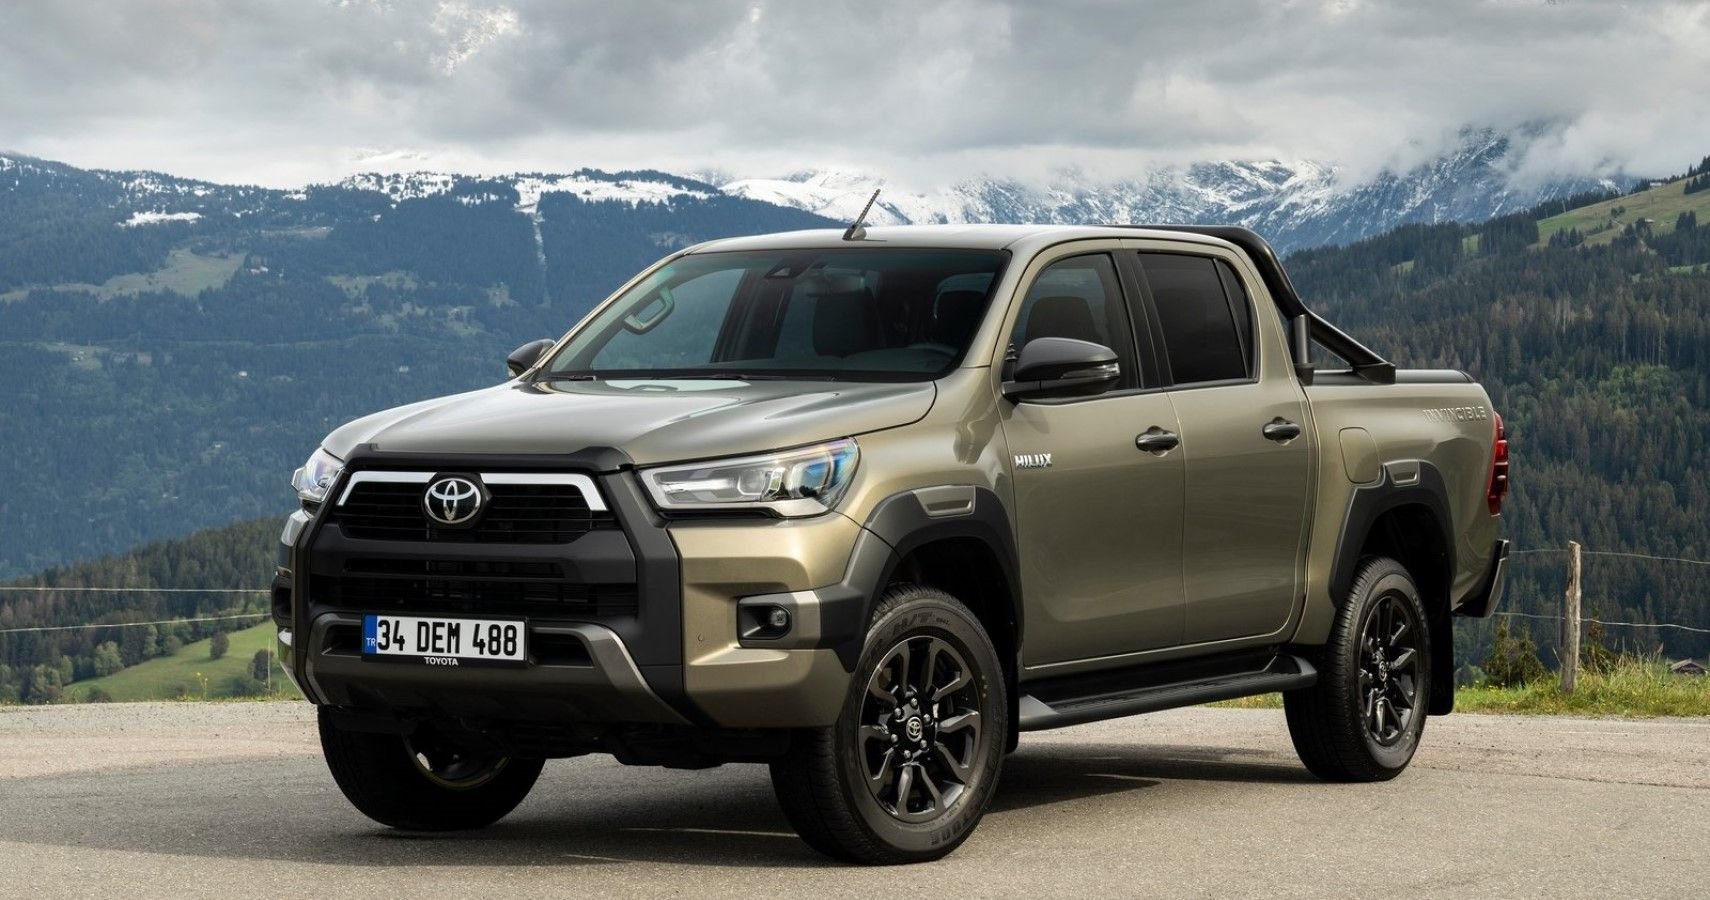 The Real Reason Why Toyota Hilux Is Banned In The US